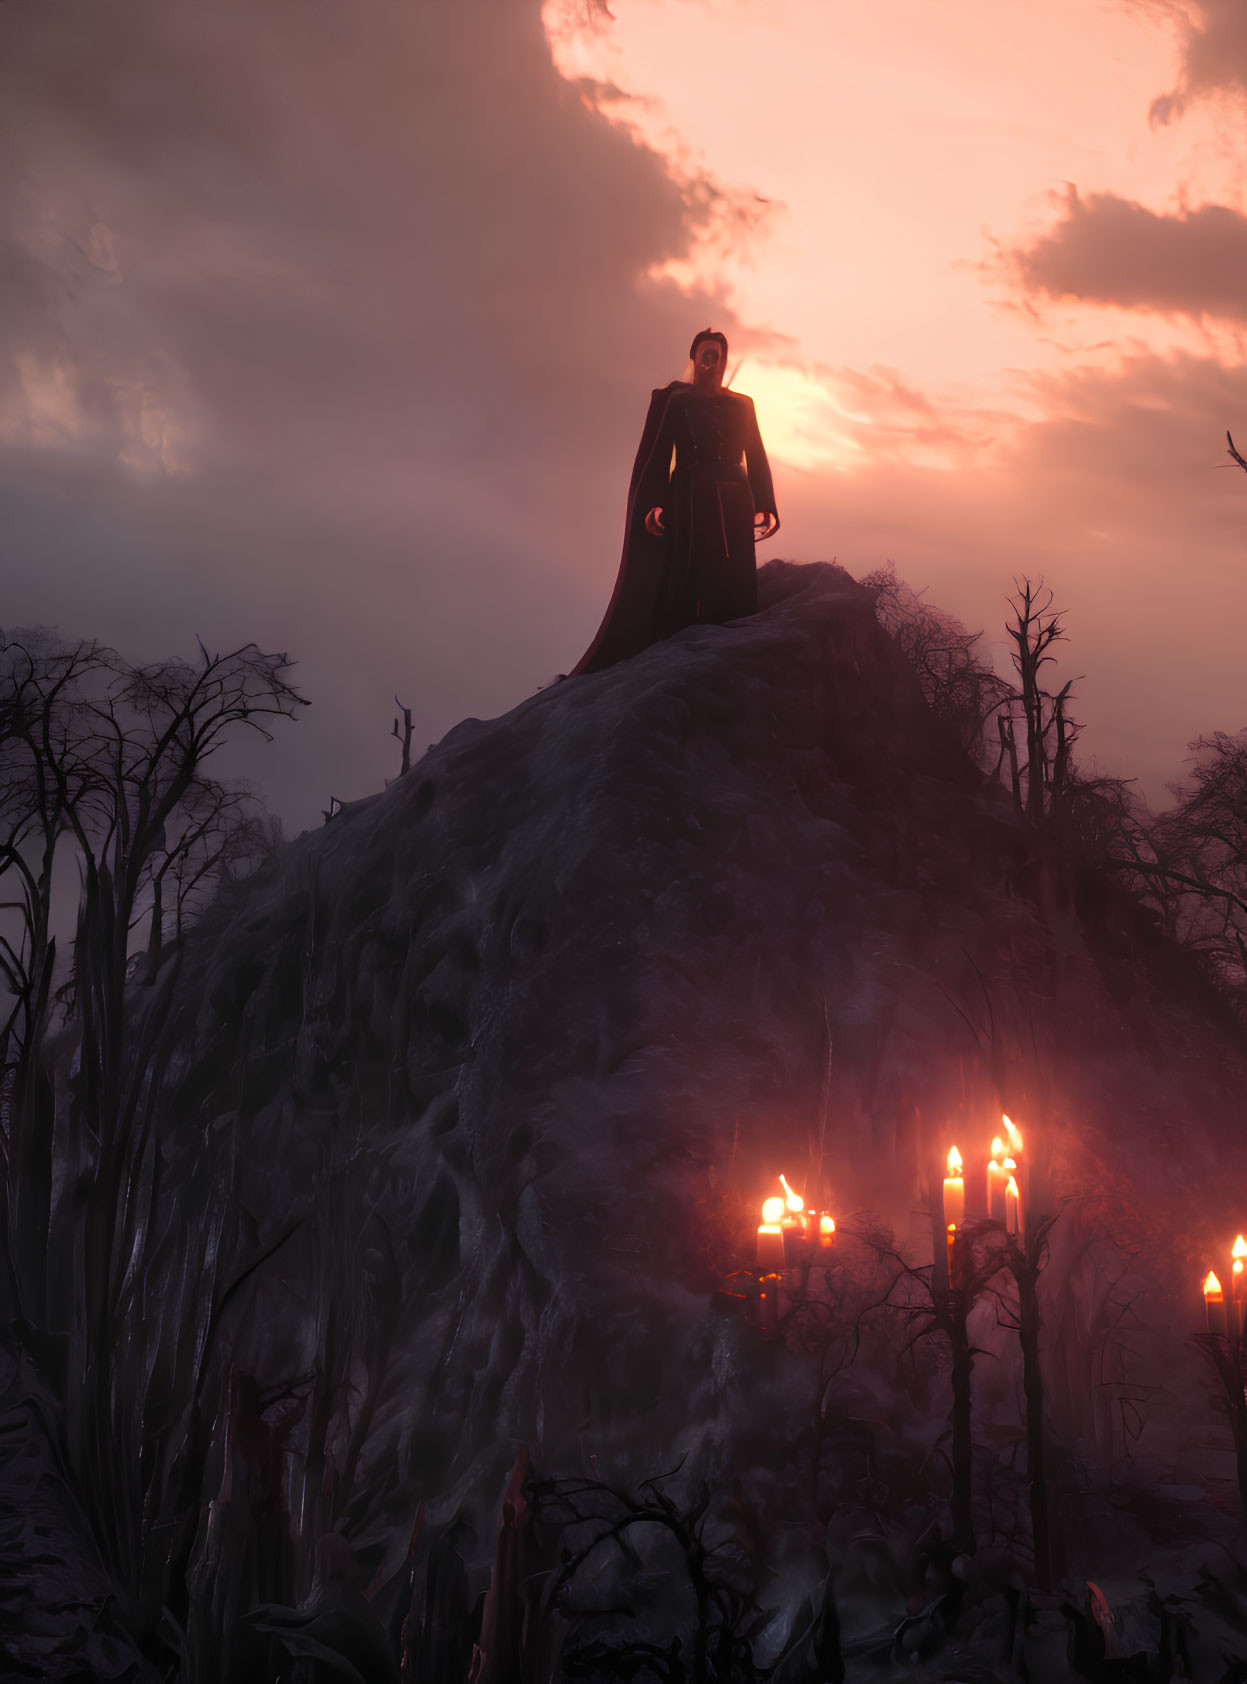 Mysterious cloaked figure on craggy hill with candles under pink sky